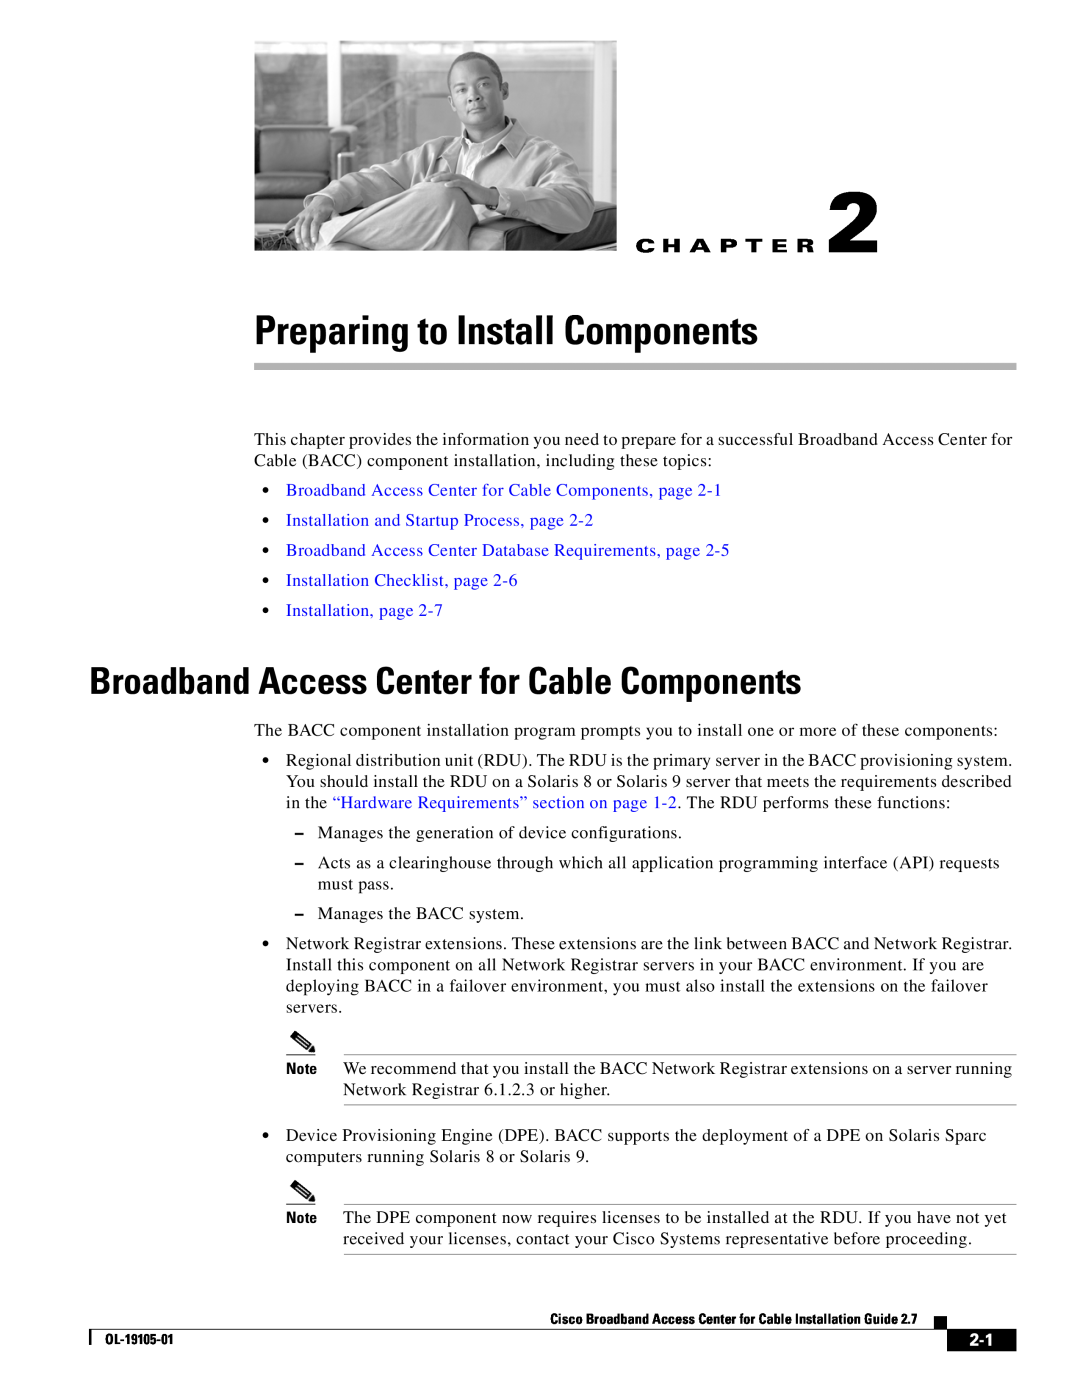 Cisco Systems manual Preparing to Install Components, Broadband Access Center for Cable Components, C H A P T E R 